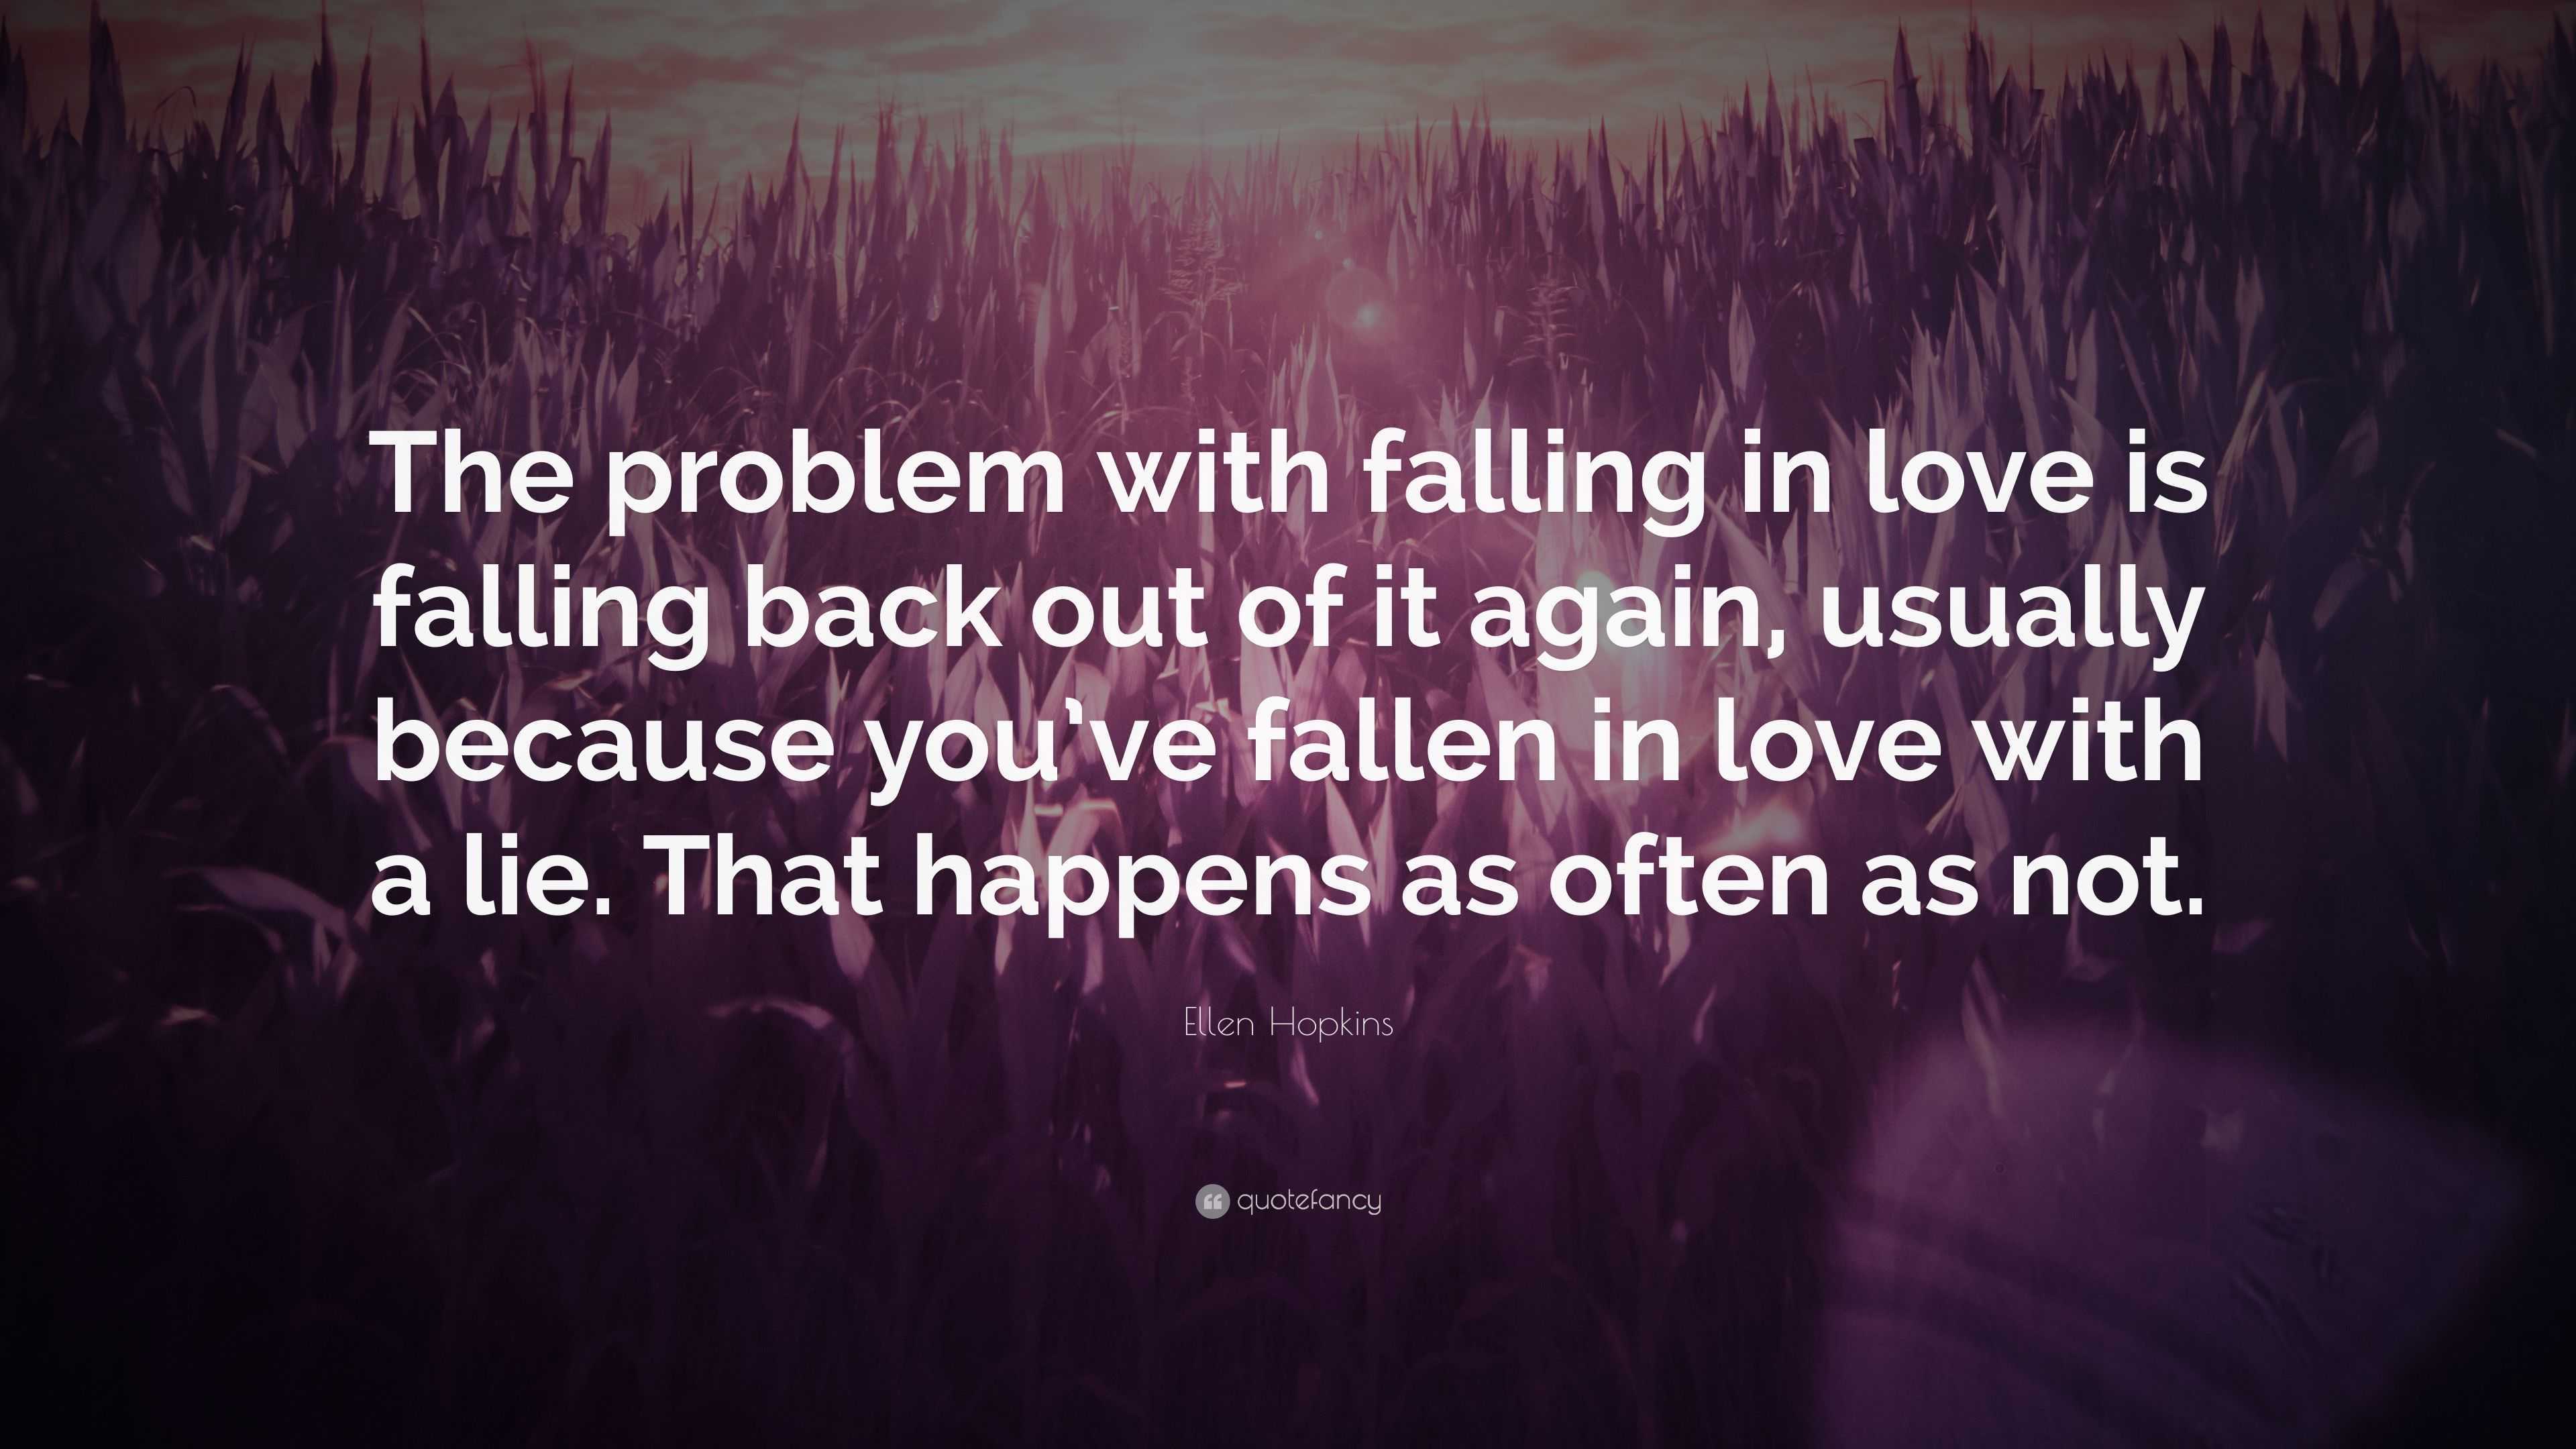 Ellen Hopkins Quote “The problem with falling in love is falling back out of